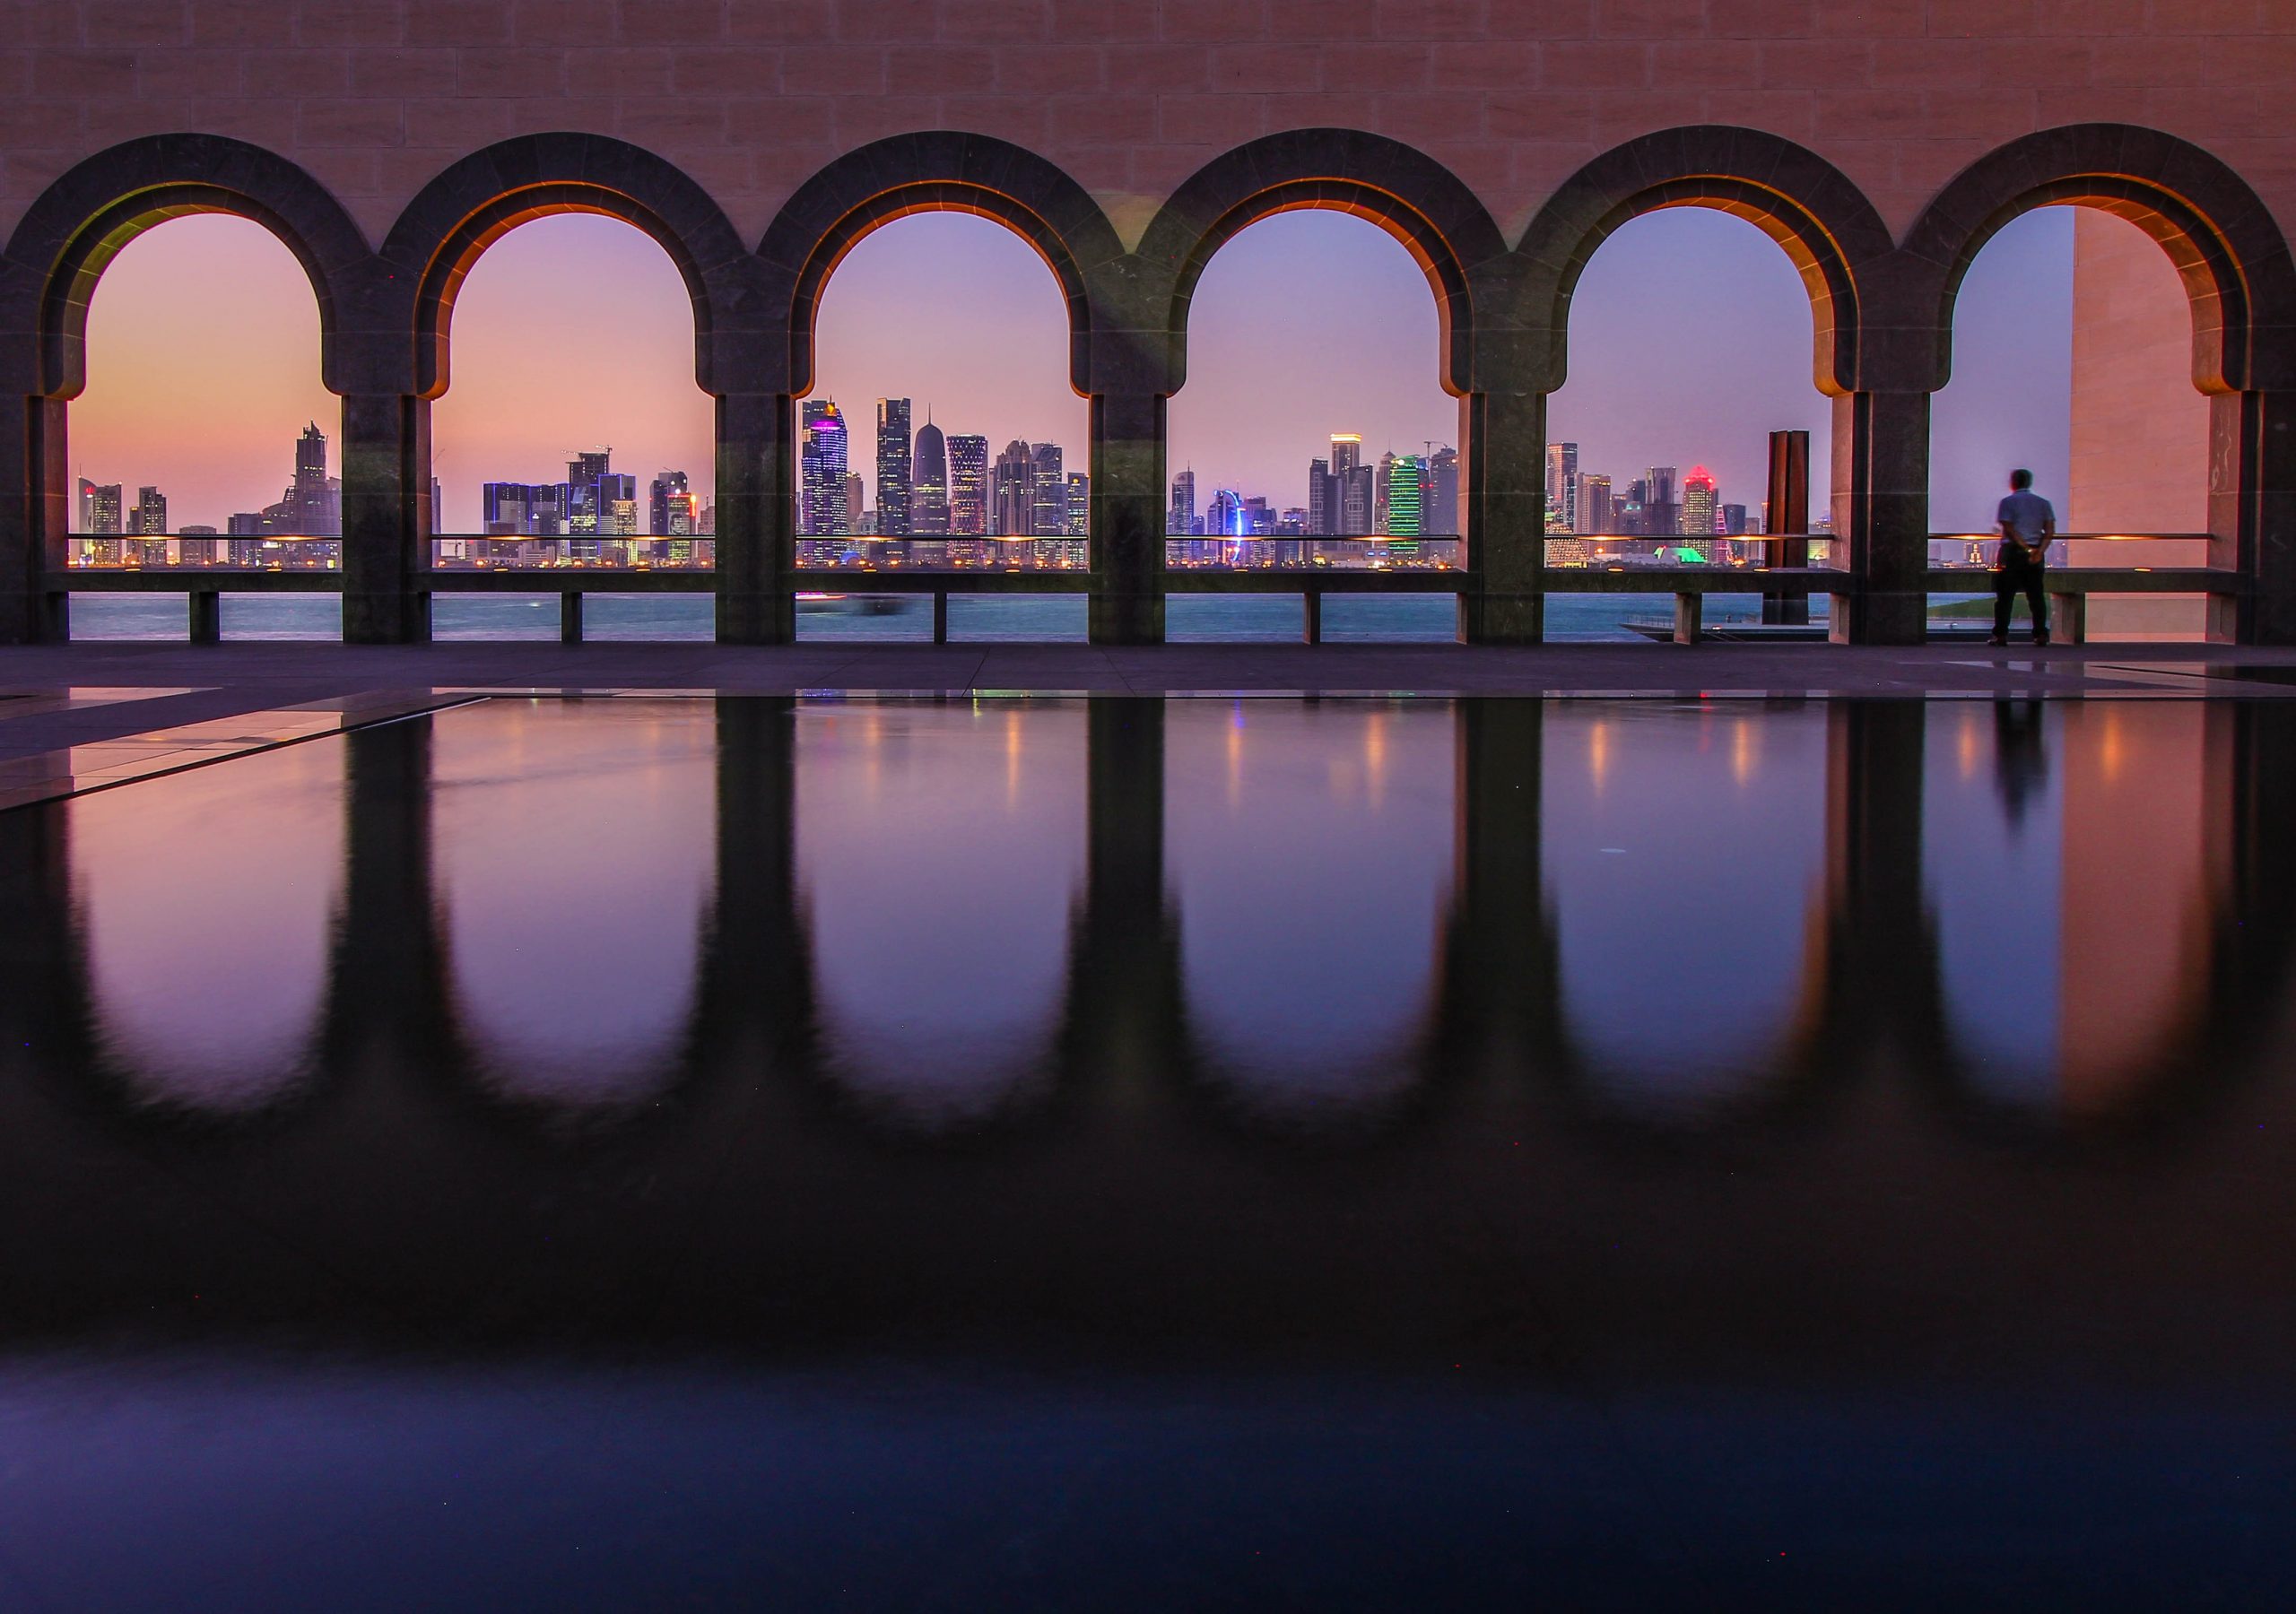 20 Tips to See the Best of Qatar in 24 Hours